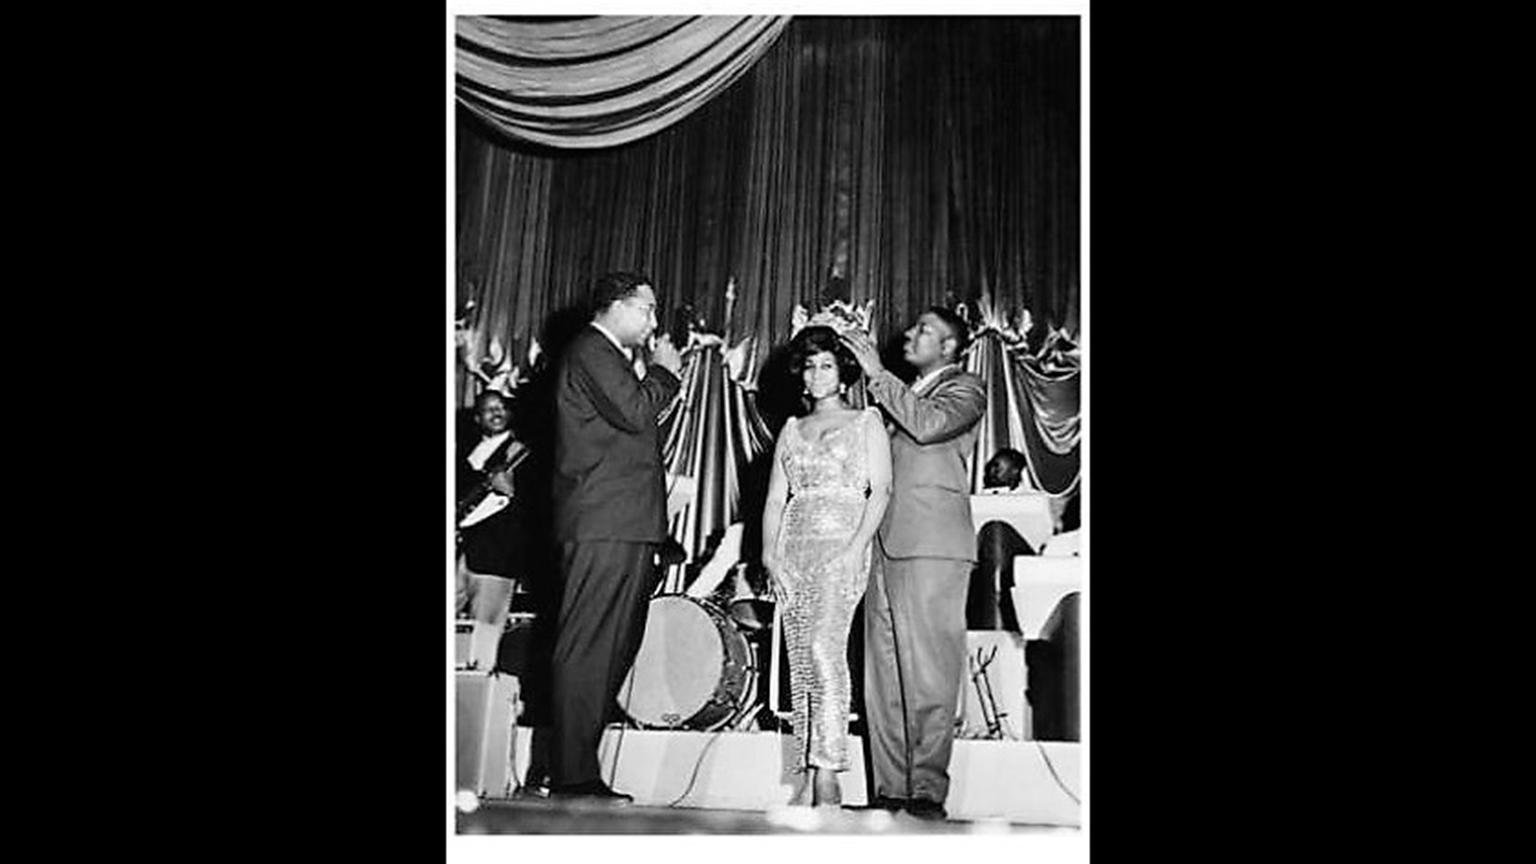 Aretha Franklin is crowned by Pervis Spann at the Regal Theater in May 1964 while Rodney Jones watches. (Courtesy of Jet Magazine)